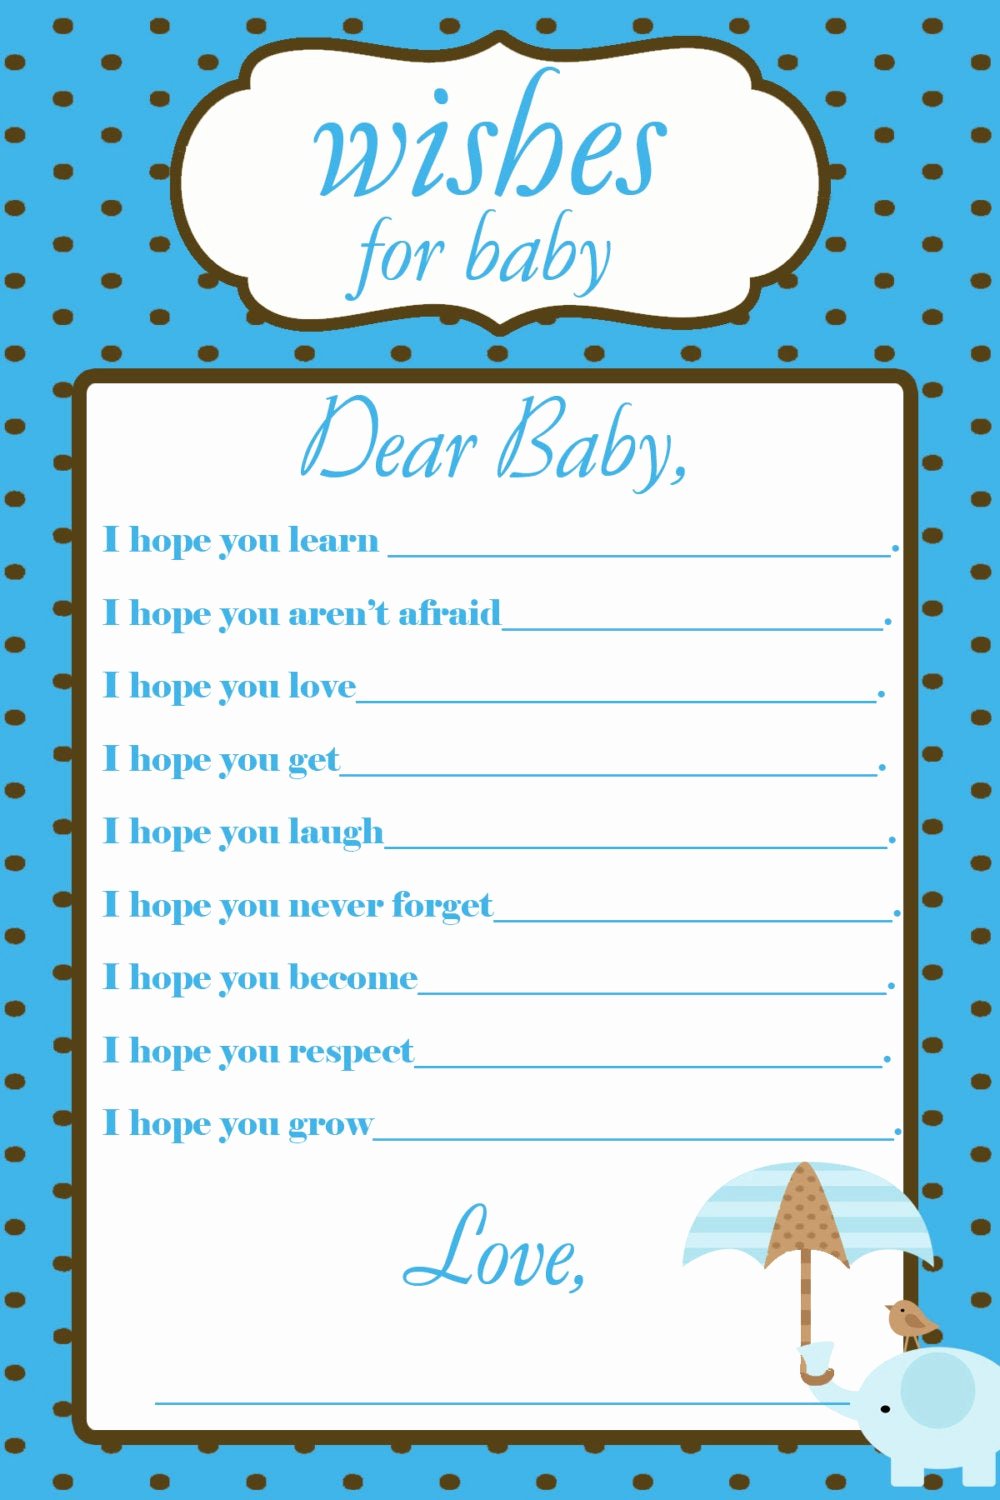 Printable Baby Shower Cards Awesome Printable Wishes for Baby Baby Shower